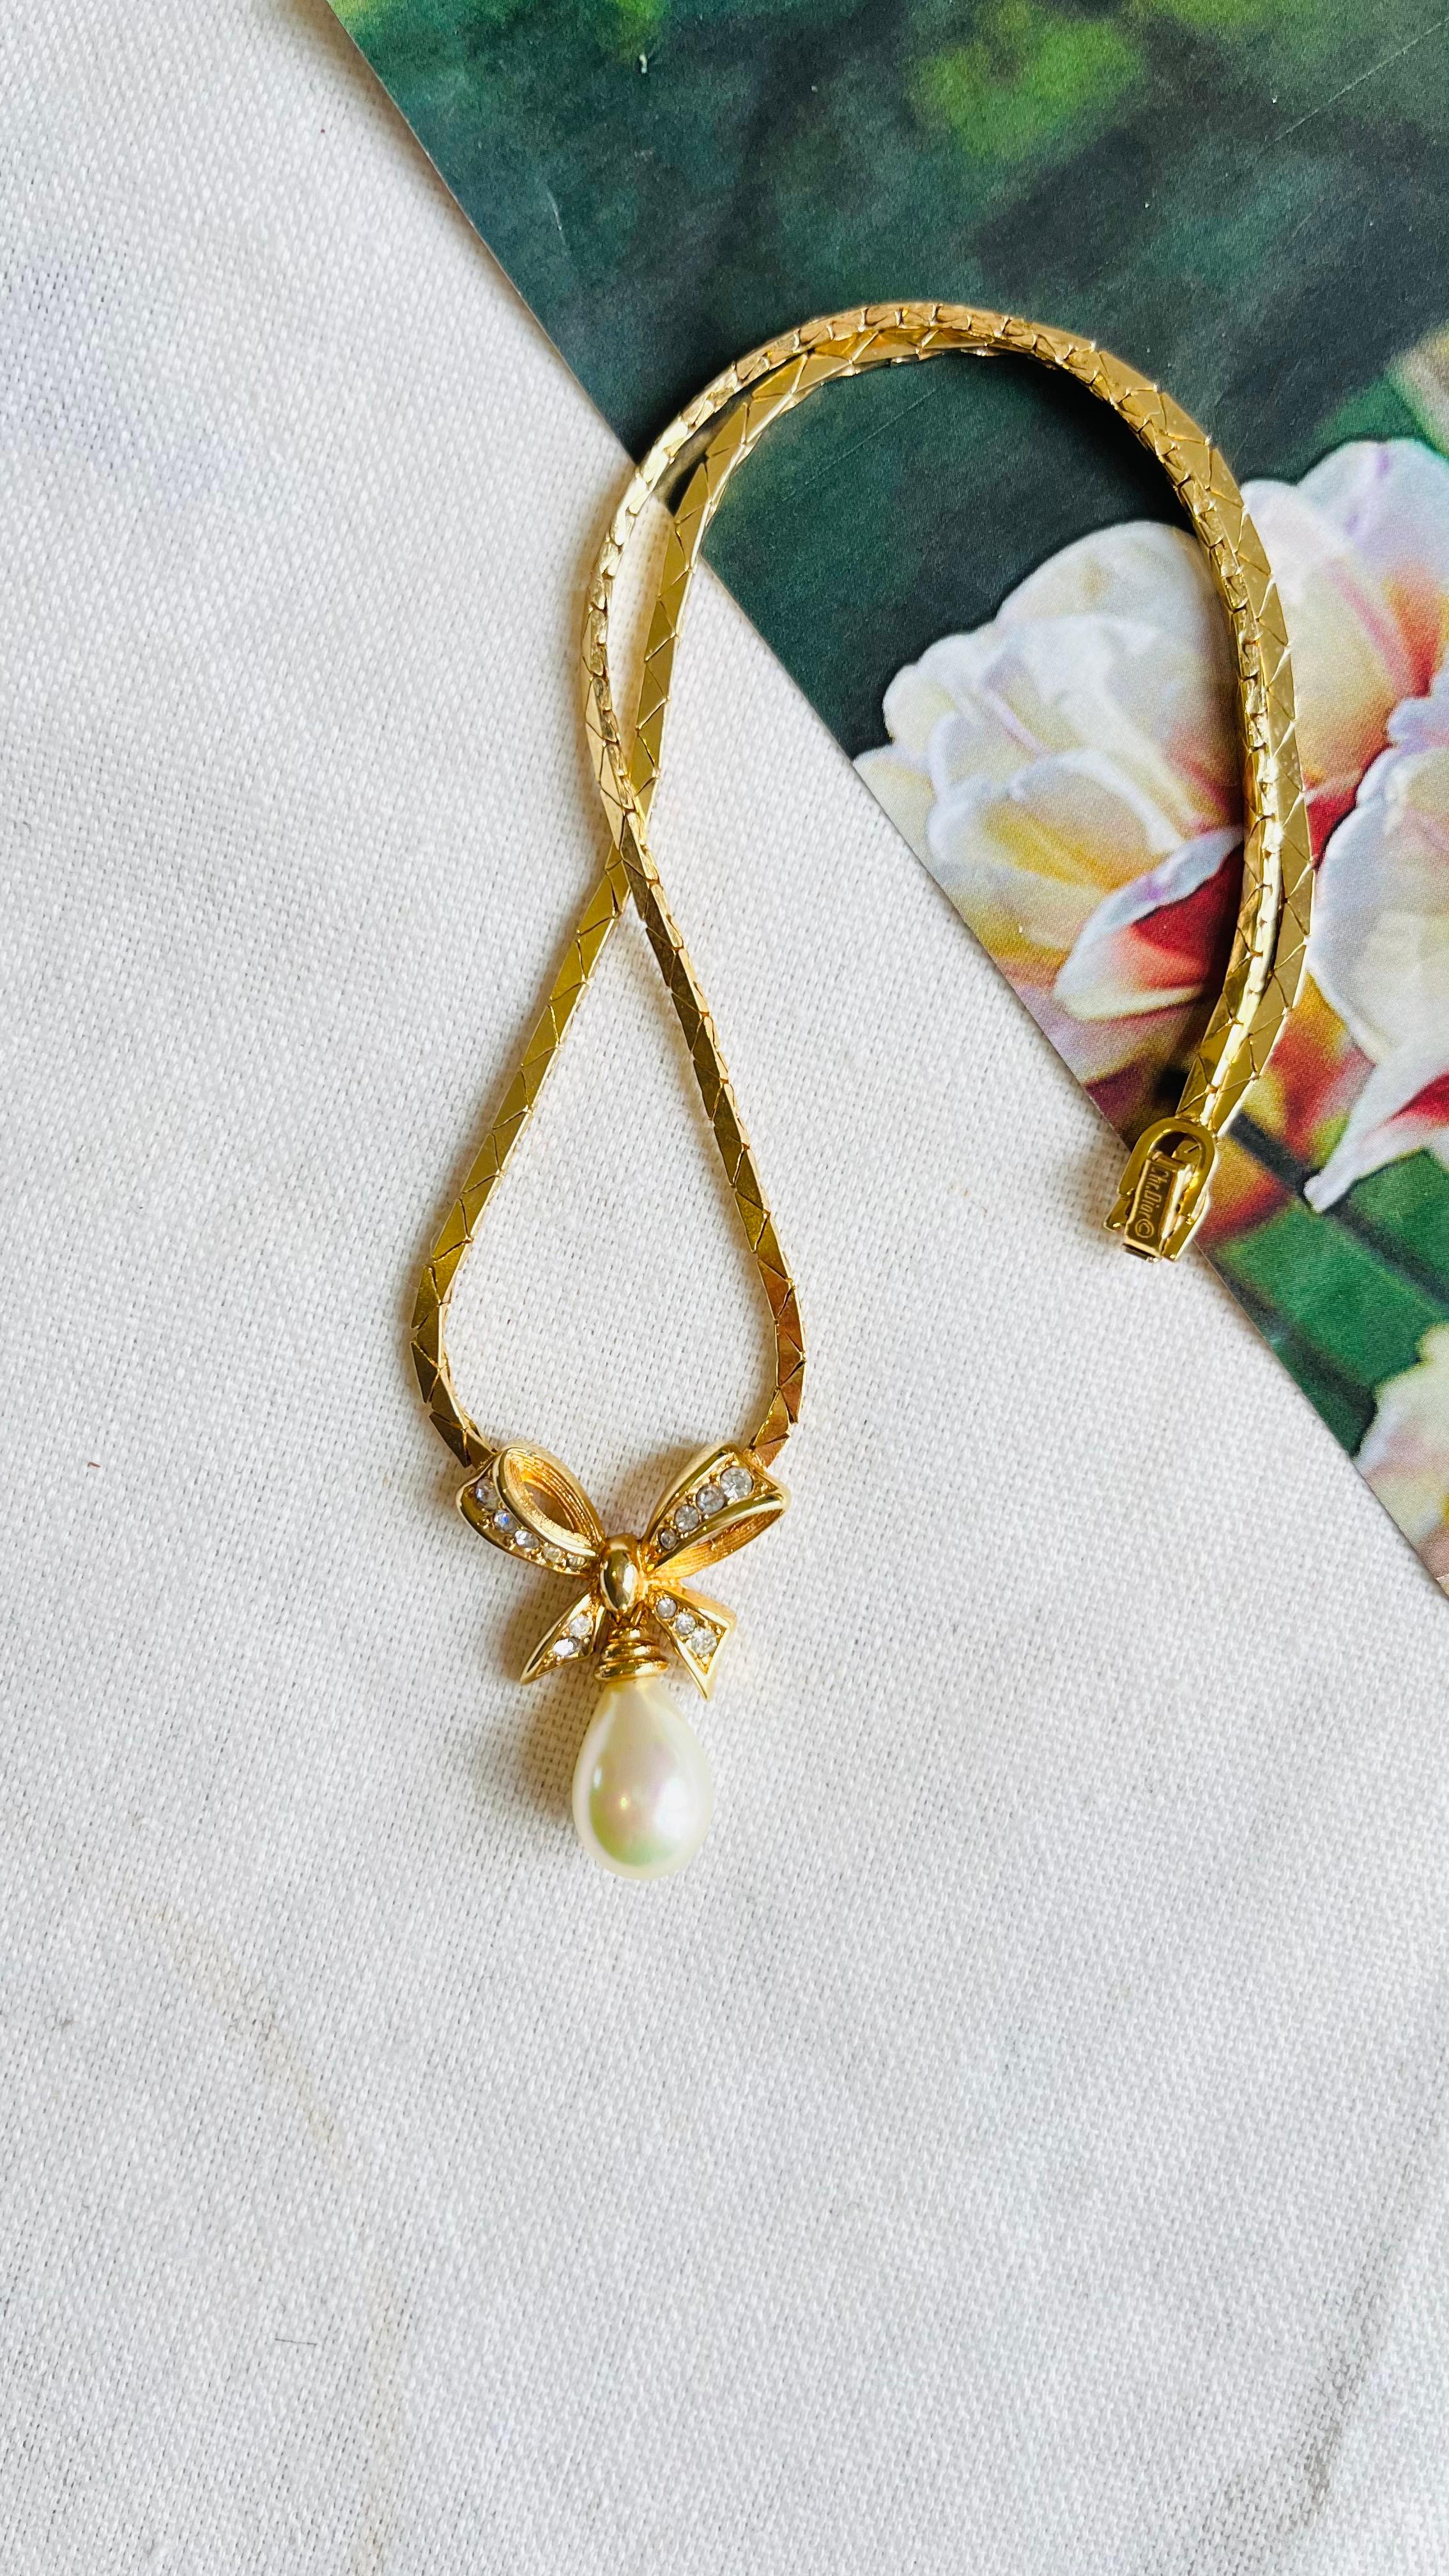 Christian Dior Vintage 1980s Knot Bow Water Drop Pearl Crystal Pendant Necklace, Gold Plated

Very excellent condition. 100% Genuine.

Constructed from polished gold plated brass with a snake chain design, this Christian Dior necklace is adorned